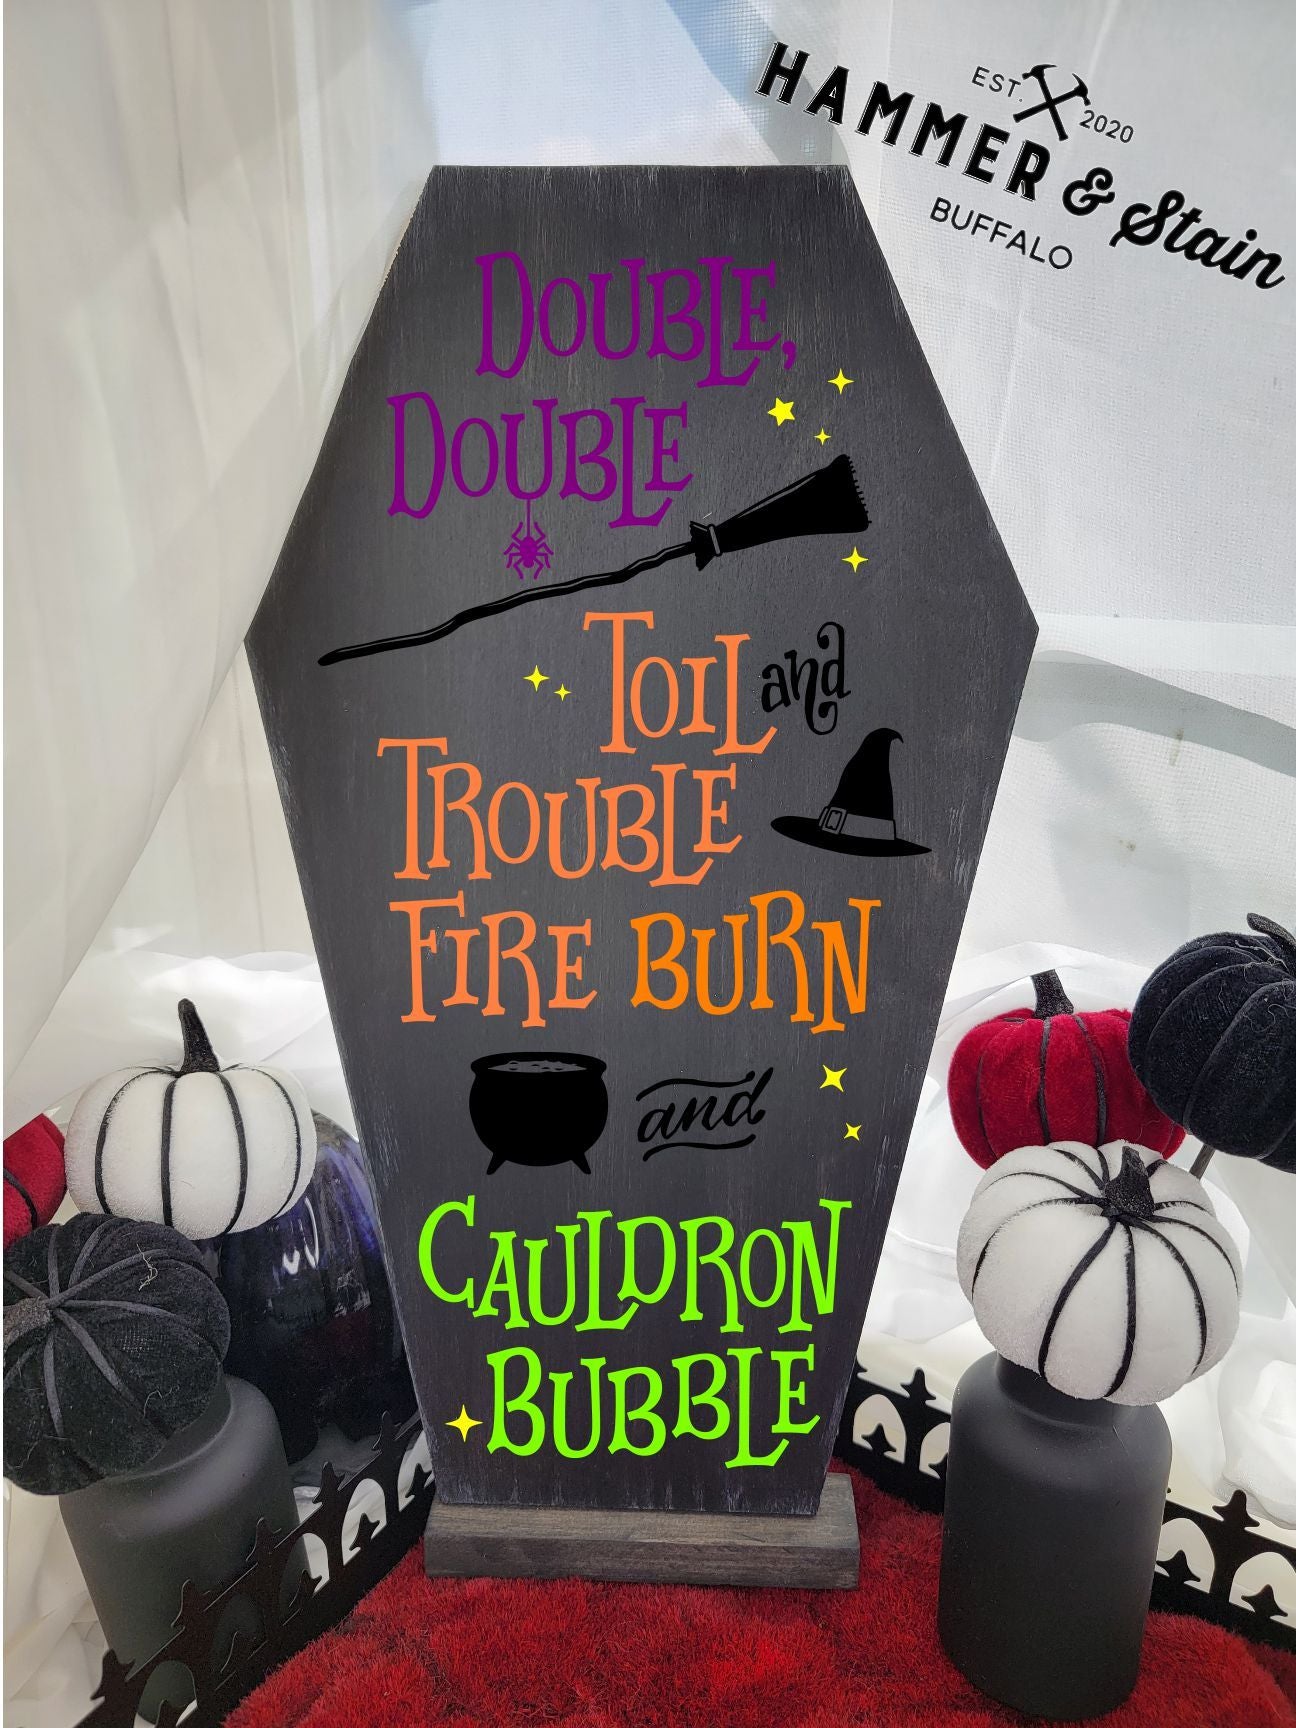 10/12/23 Char-BOO-terie & Skeleton Candle Pour Workshop 6pm